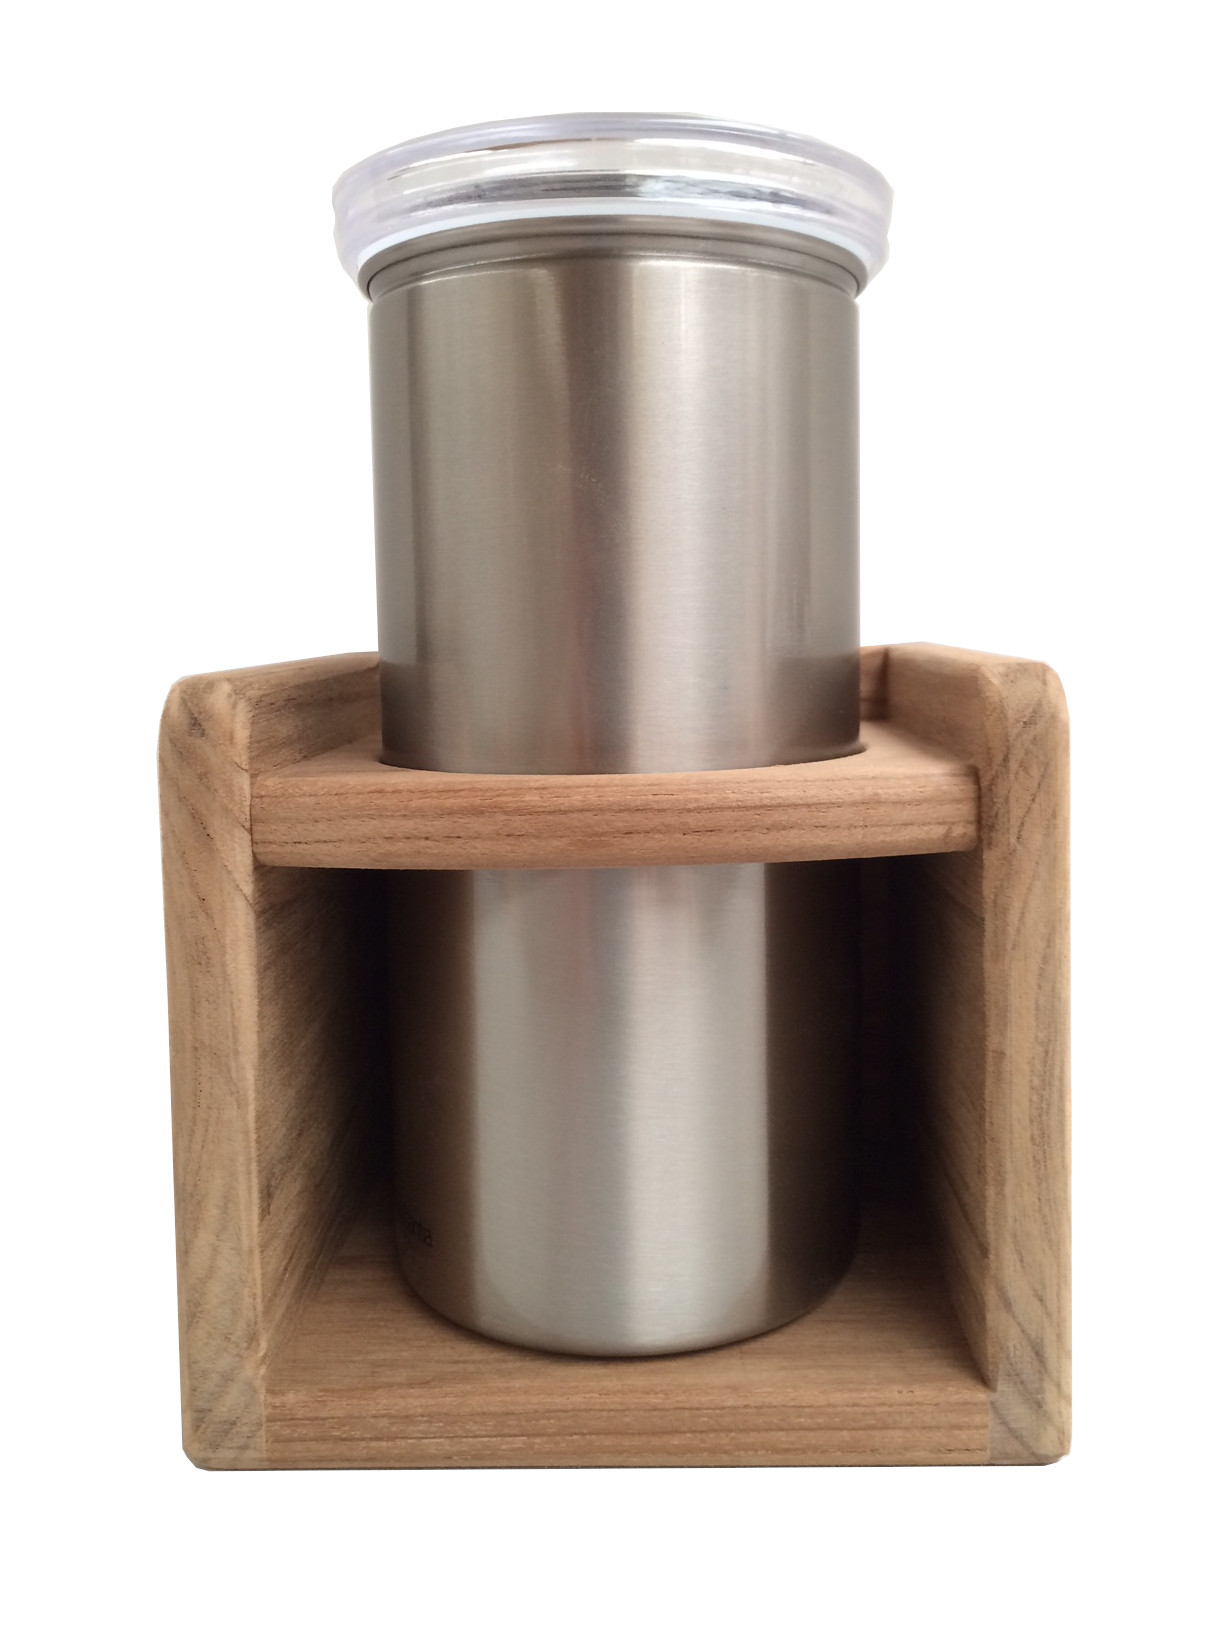 Holder for coffee pad tins